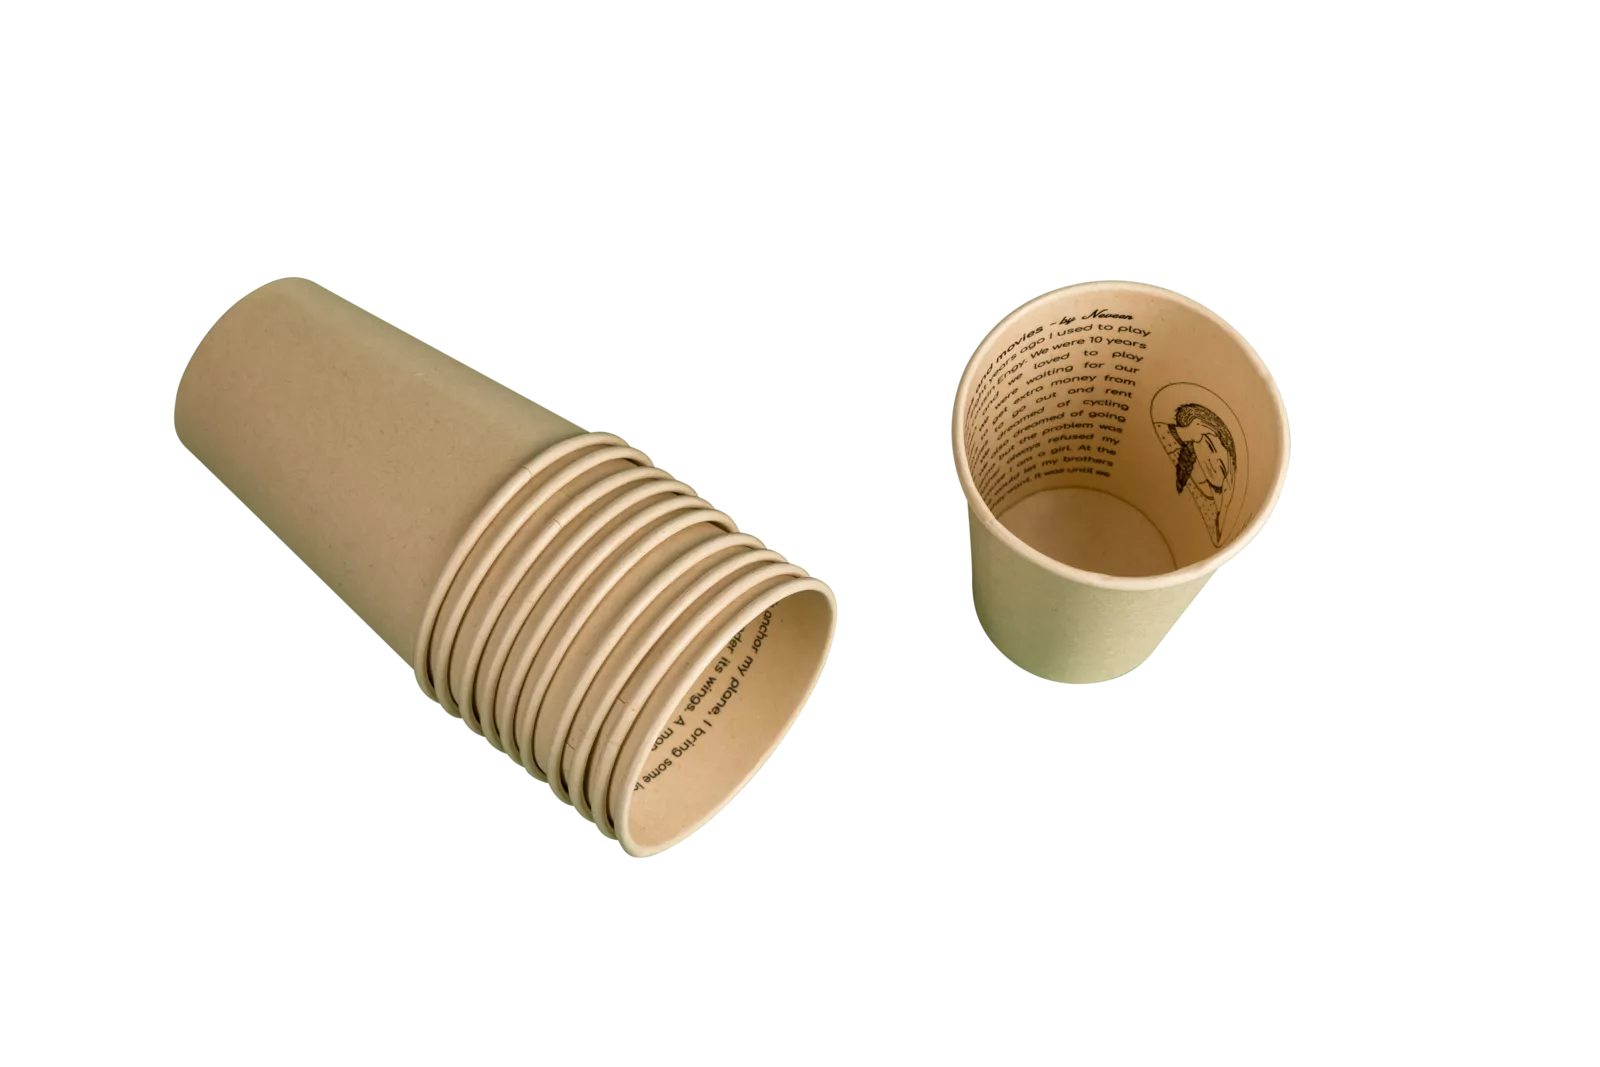 PaperWise eco bio cups drinks coffee tea water disposable compostable paper board insideprinting packaging office promo c